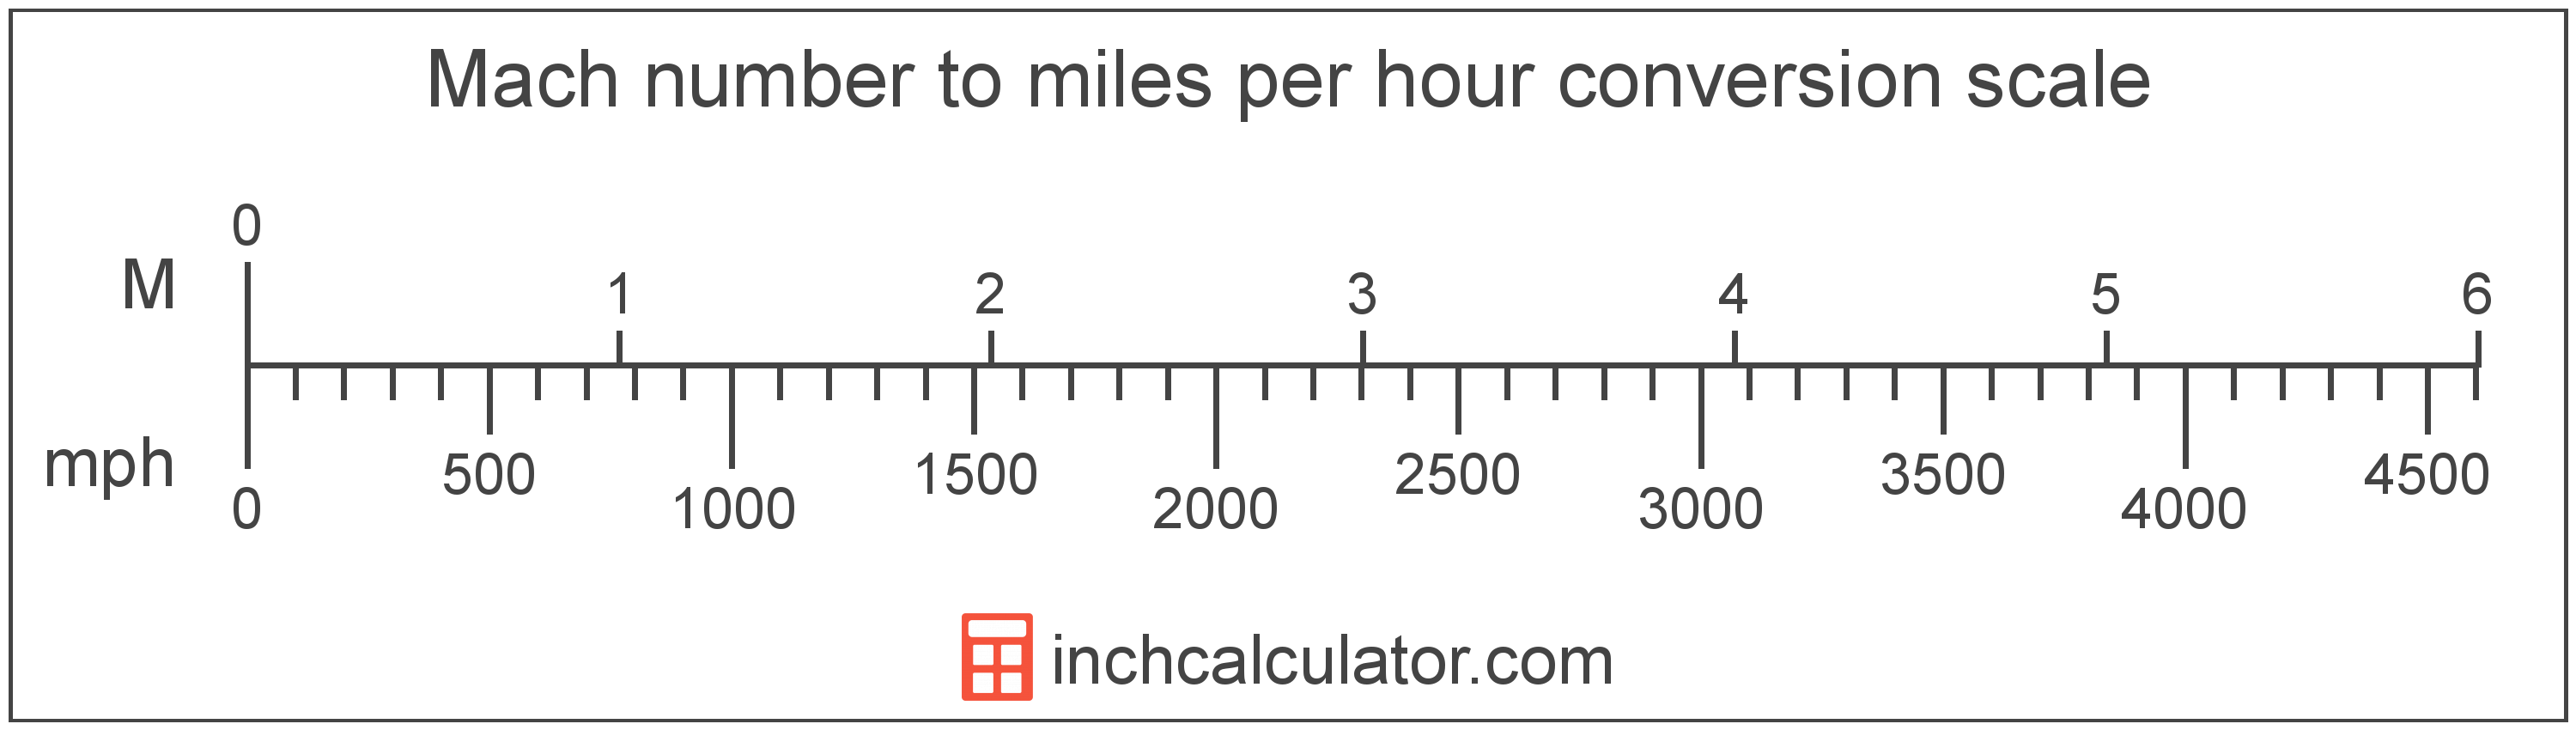 conversion scale showing miles per hour and equivalent Mach number speed values